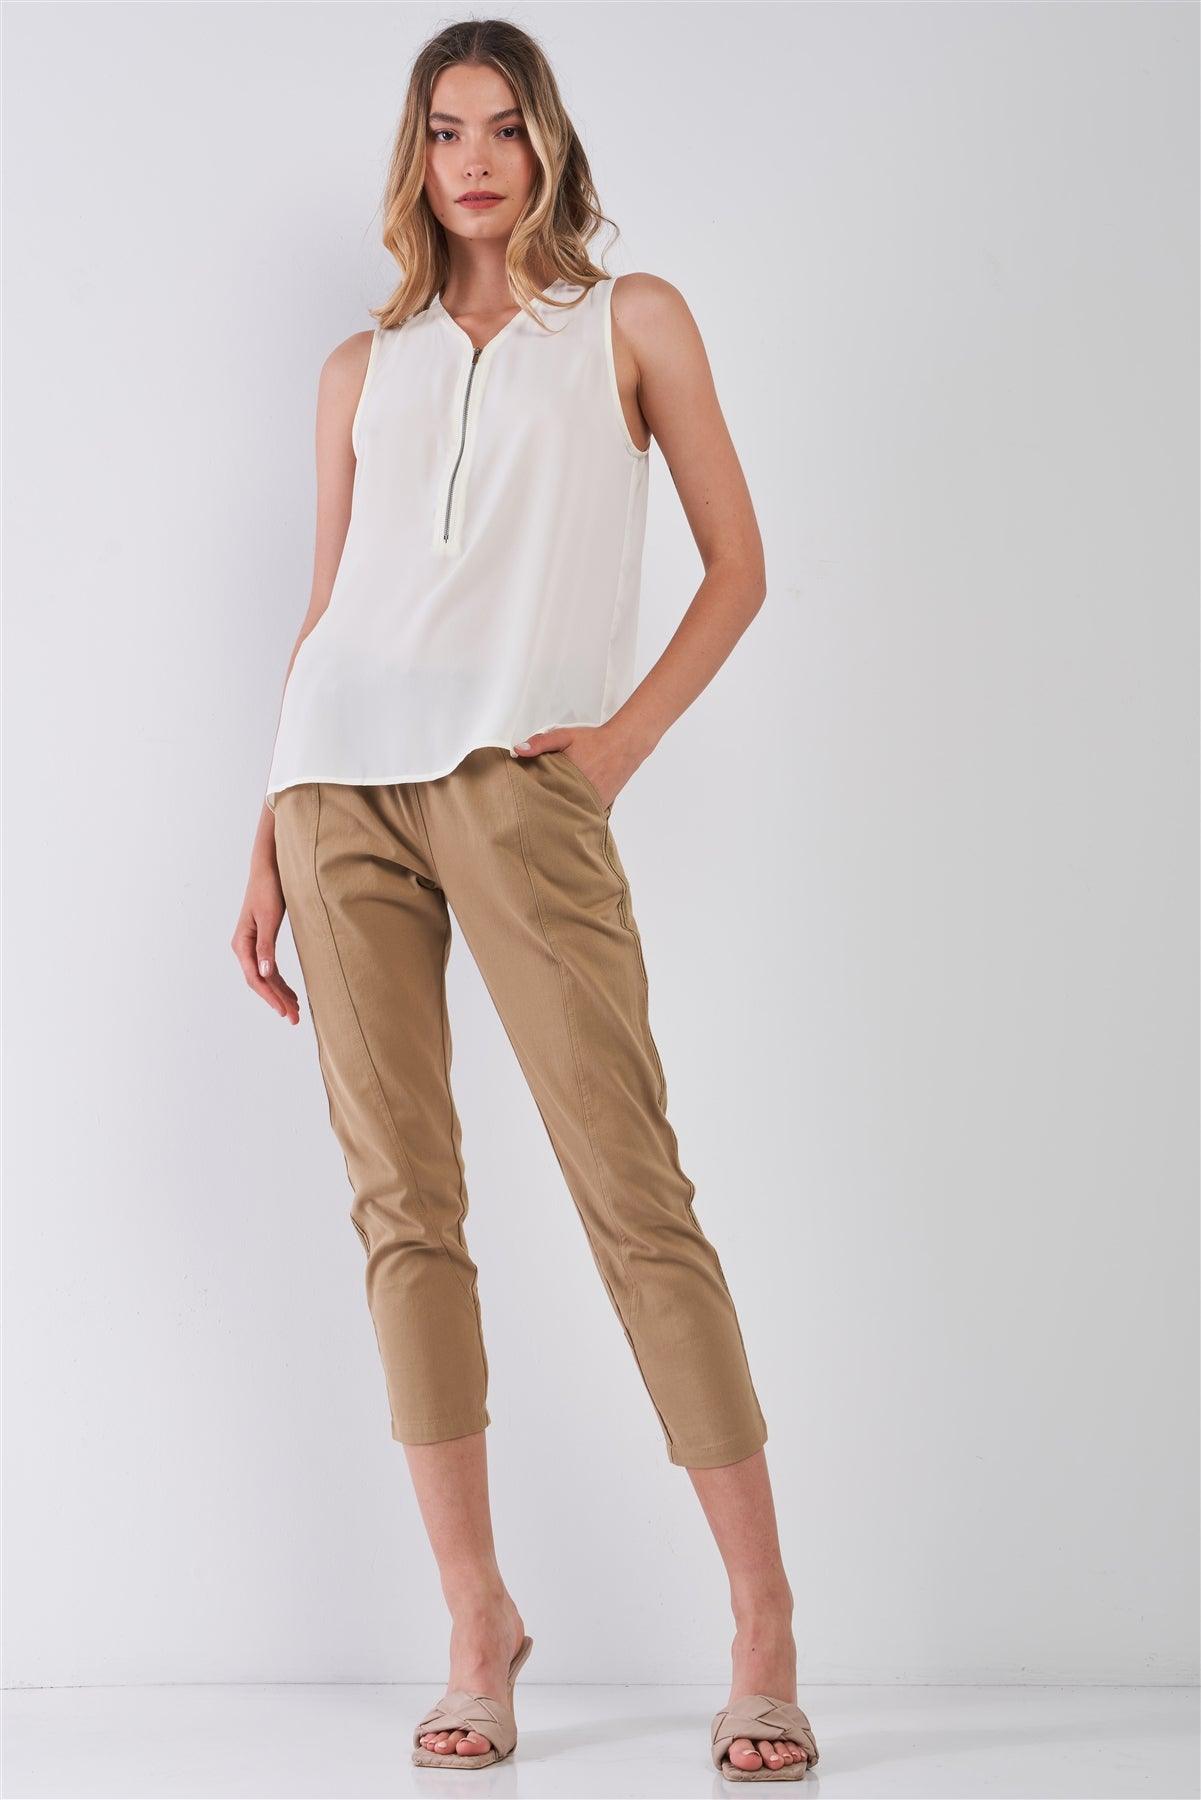 Off-White Sleeveless Zip-Up Detail V-Neck Relaxed Top /1-2-2-1